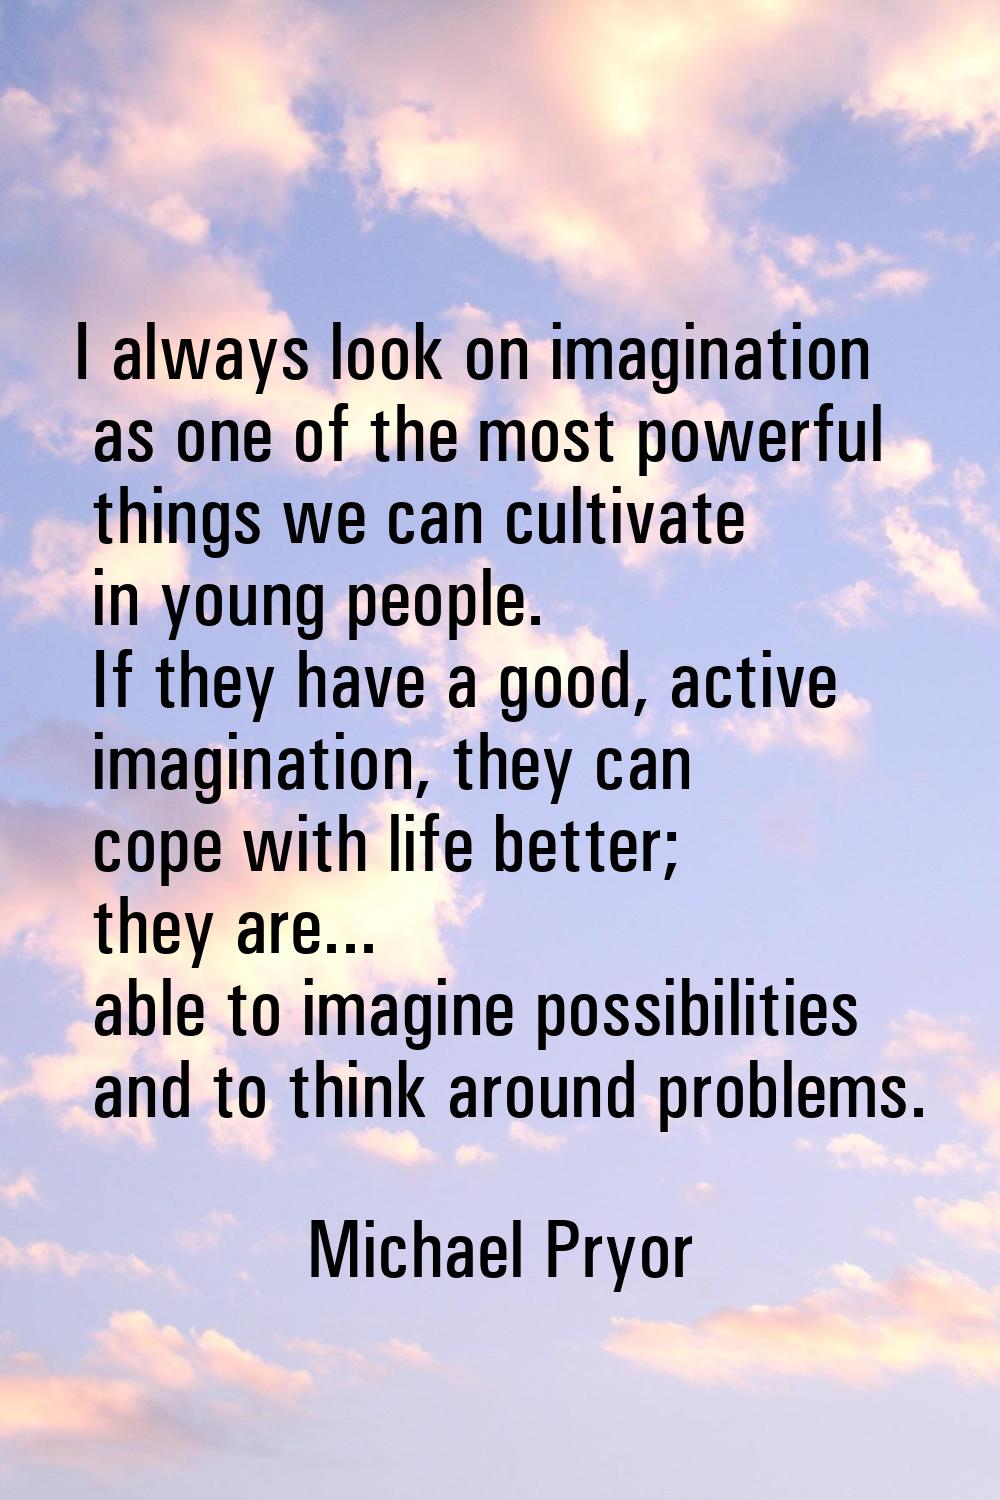 I always look on imagination as one of the most powerful things we can cultivate in young people. I